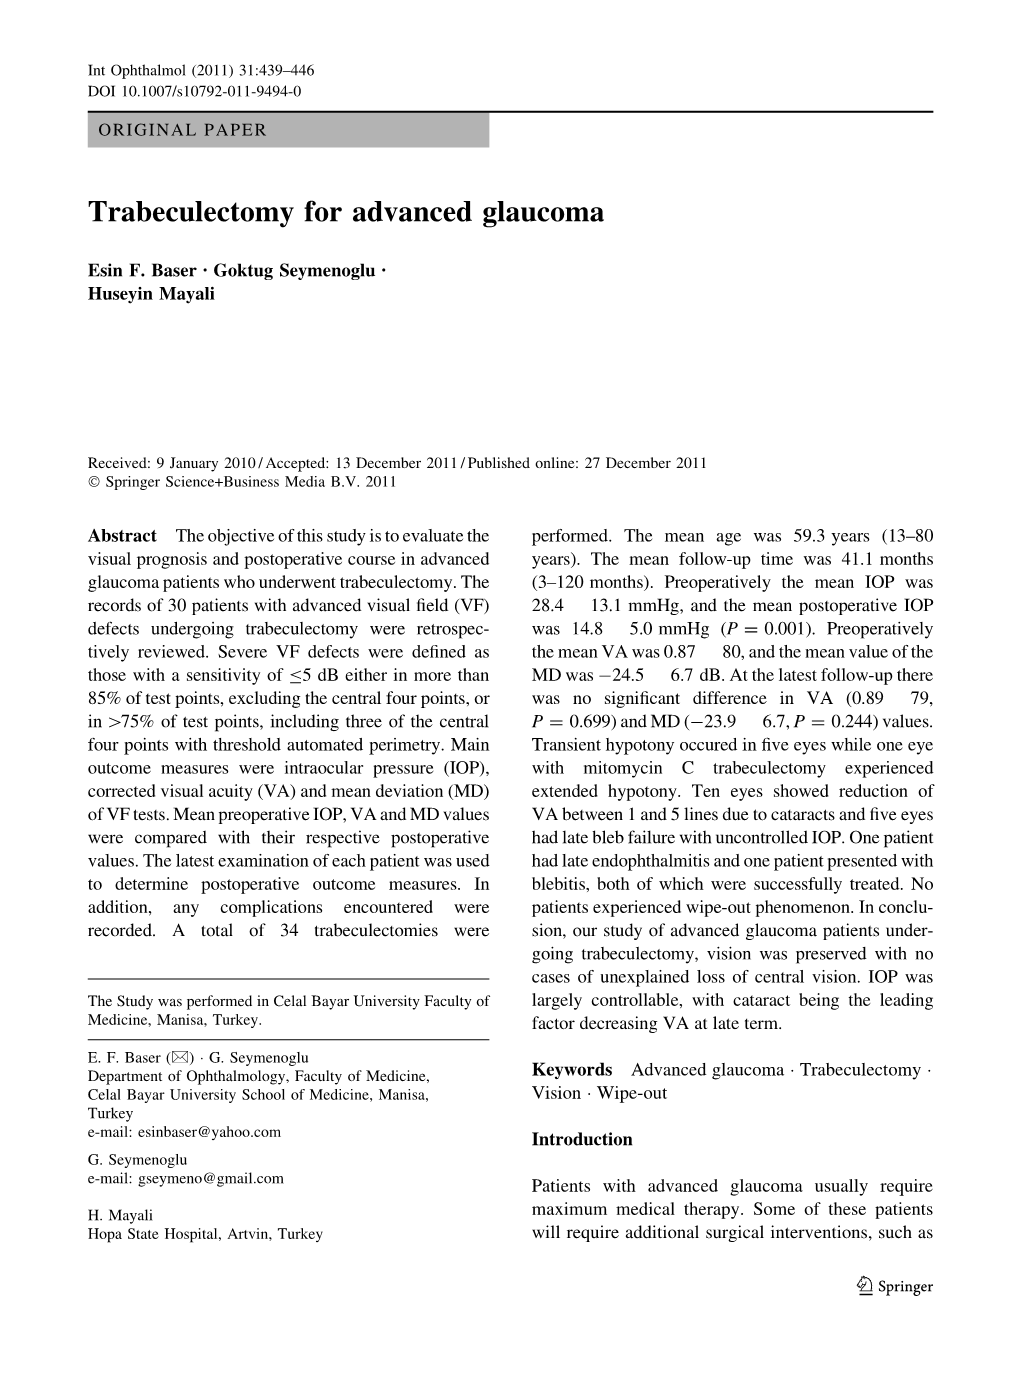 Trabeculectomy for Advanced Glaucoma